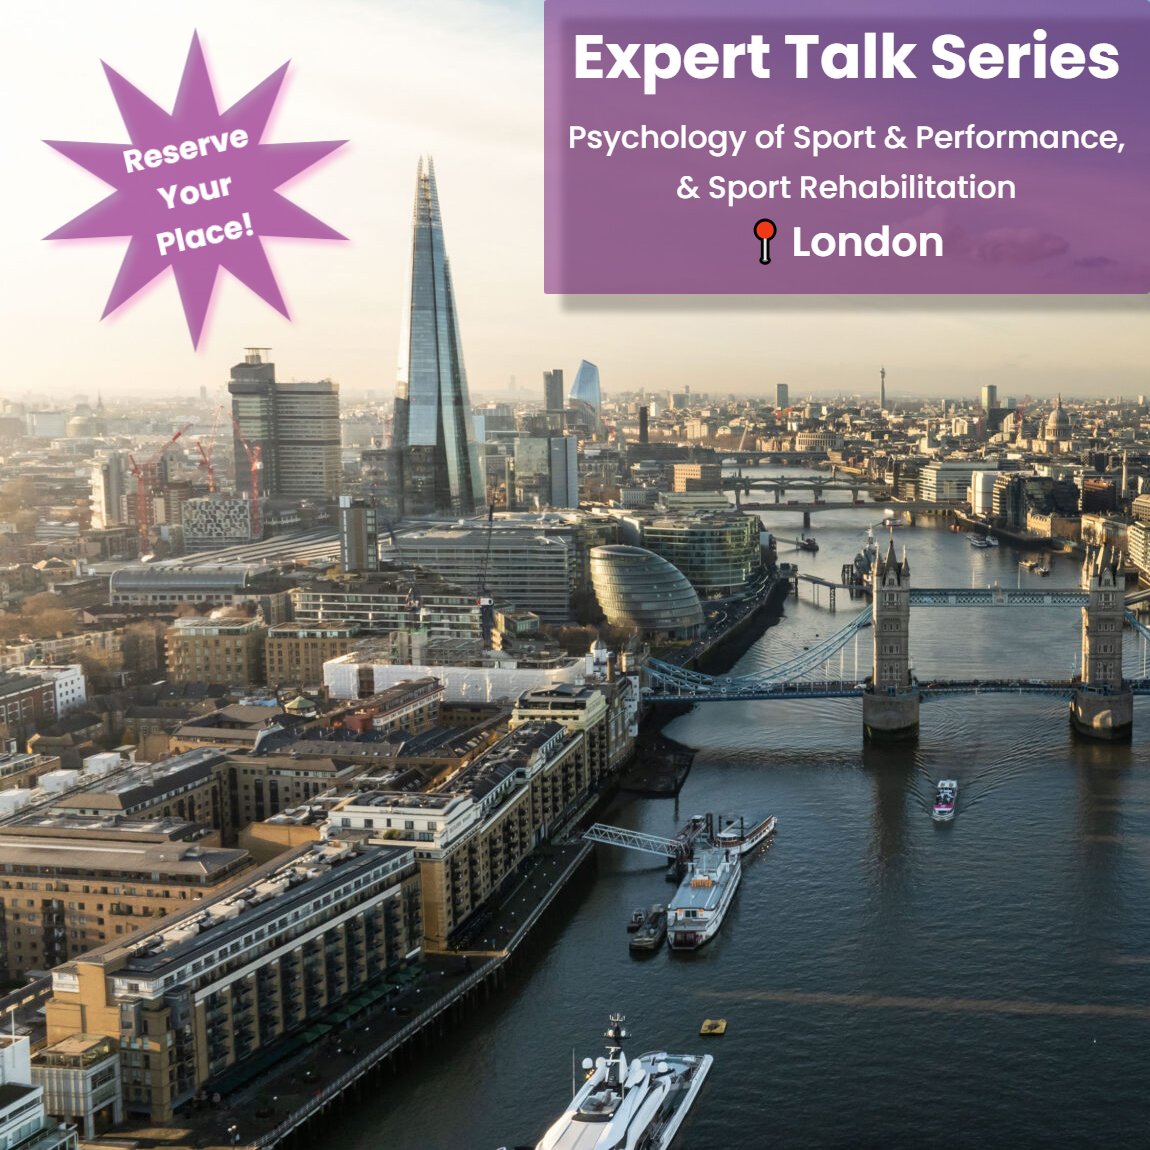 Saturday 25 May, AECC UC is hosting the first in a series of #ExpertLectures at University College of Osteopathy in #London. This will mark the launch of several talks delivered by expert staff from AECC UC that will explore contemporary understanding & best practice in... 🧵1/6